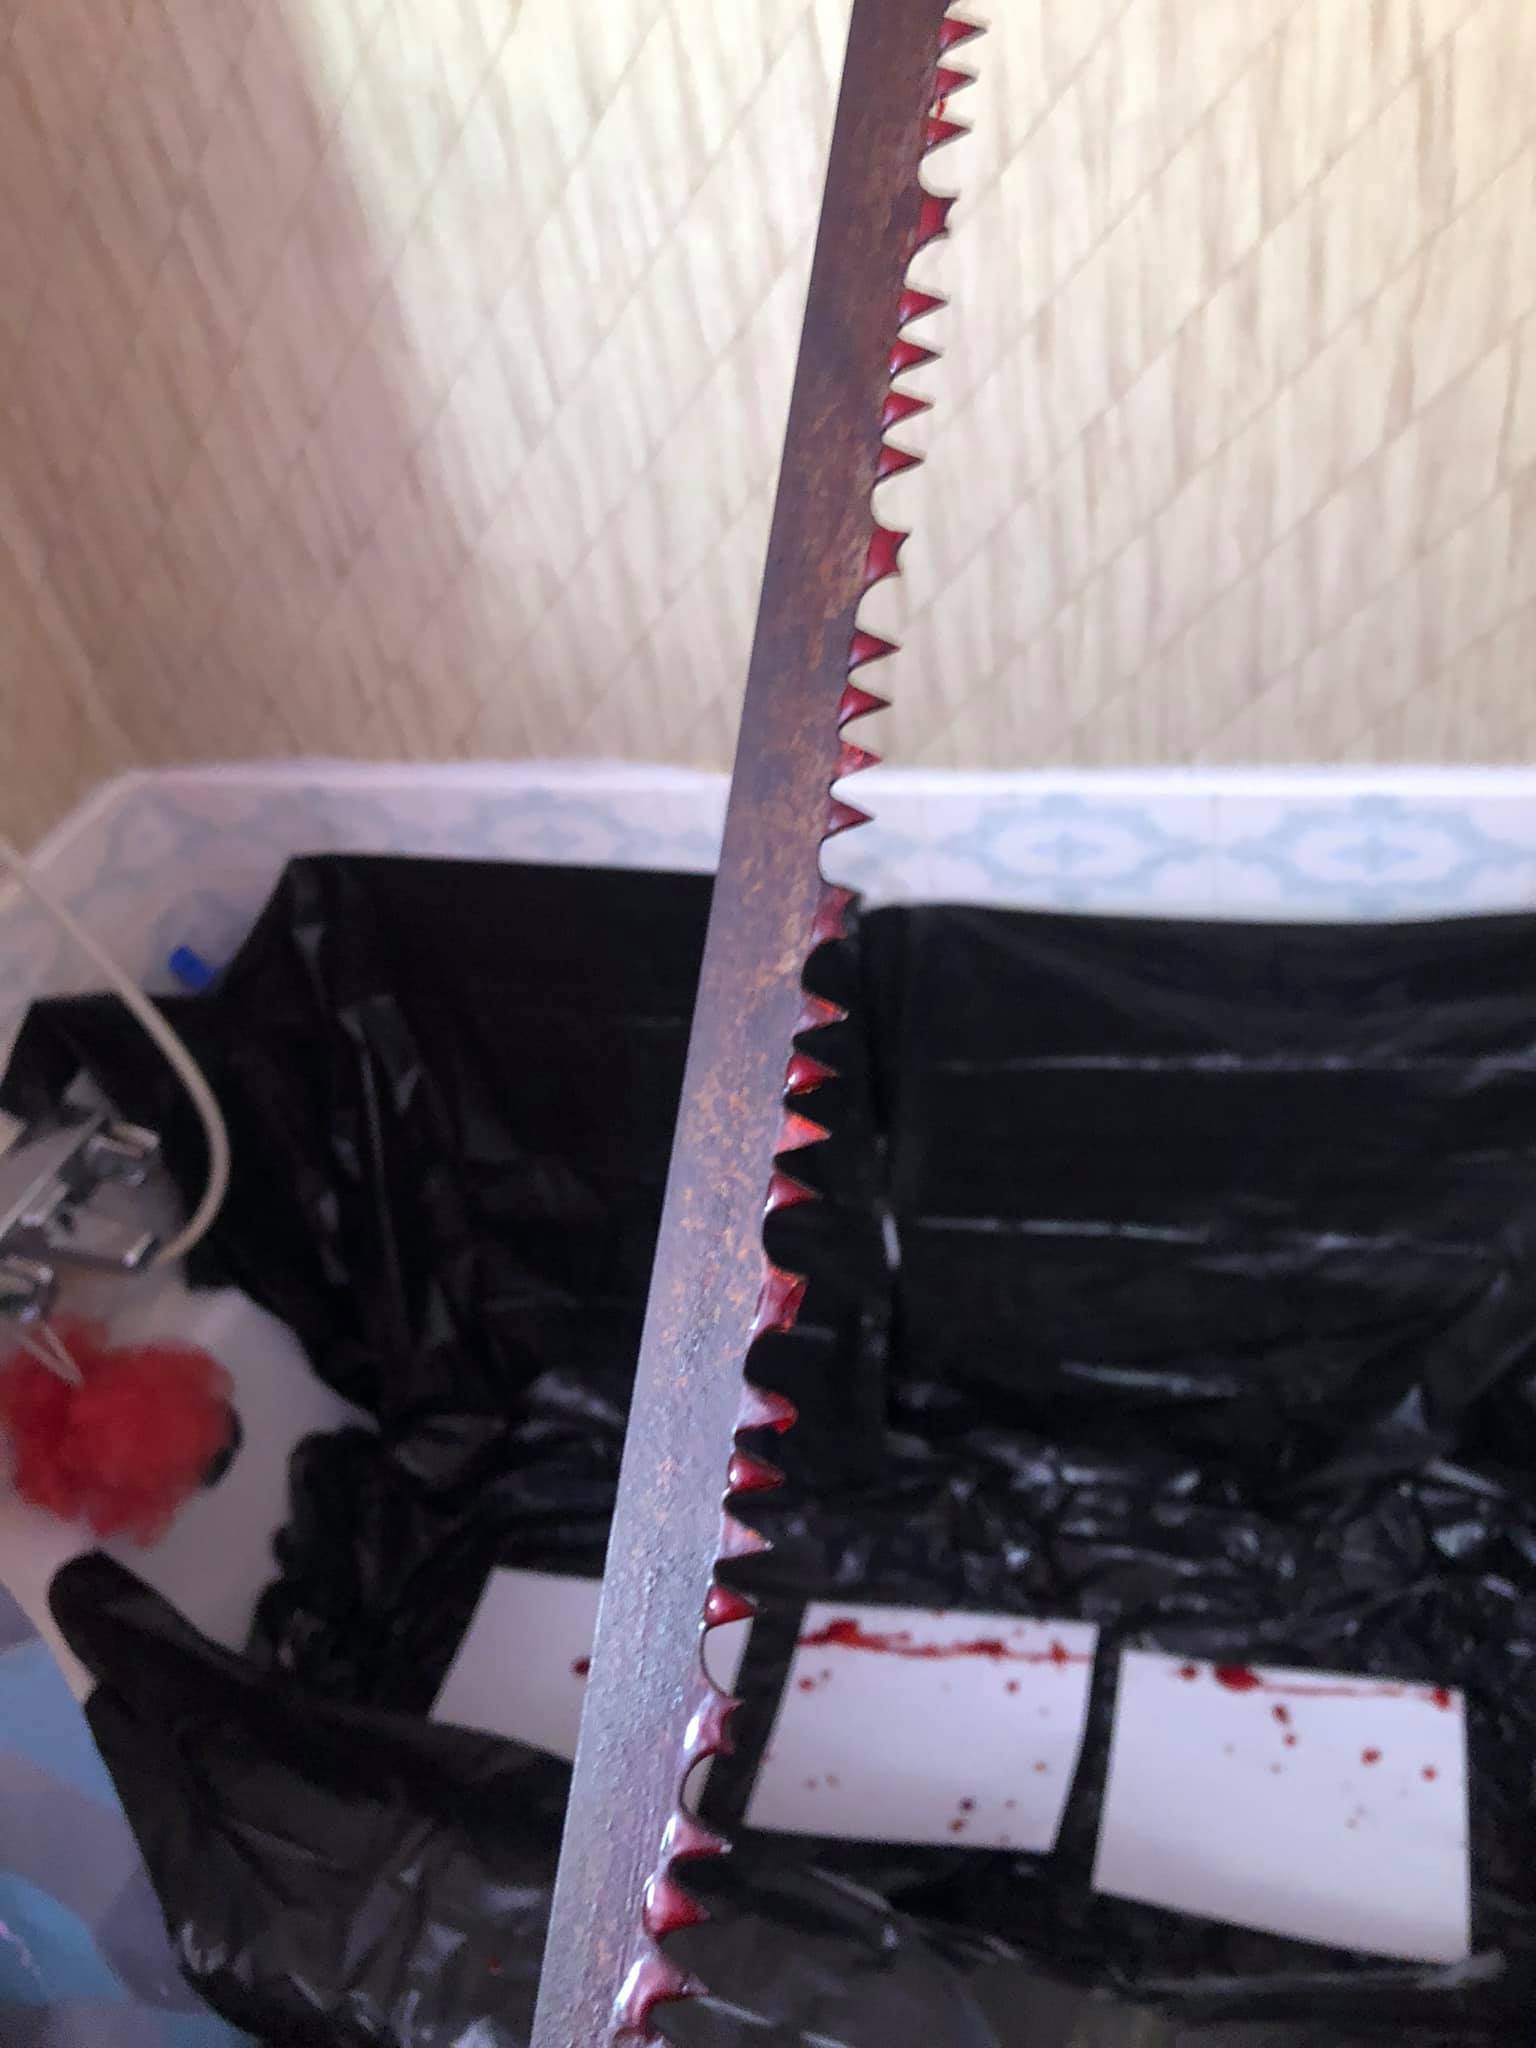 A closeup of the saw blade, where the tips are a bit red. It was cleaned with that one piece of paper though. If you don't think about that, it could be a rather confusing shot given the... blood.